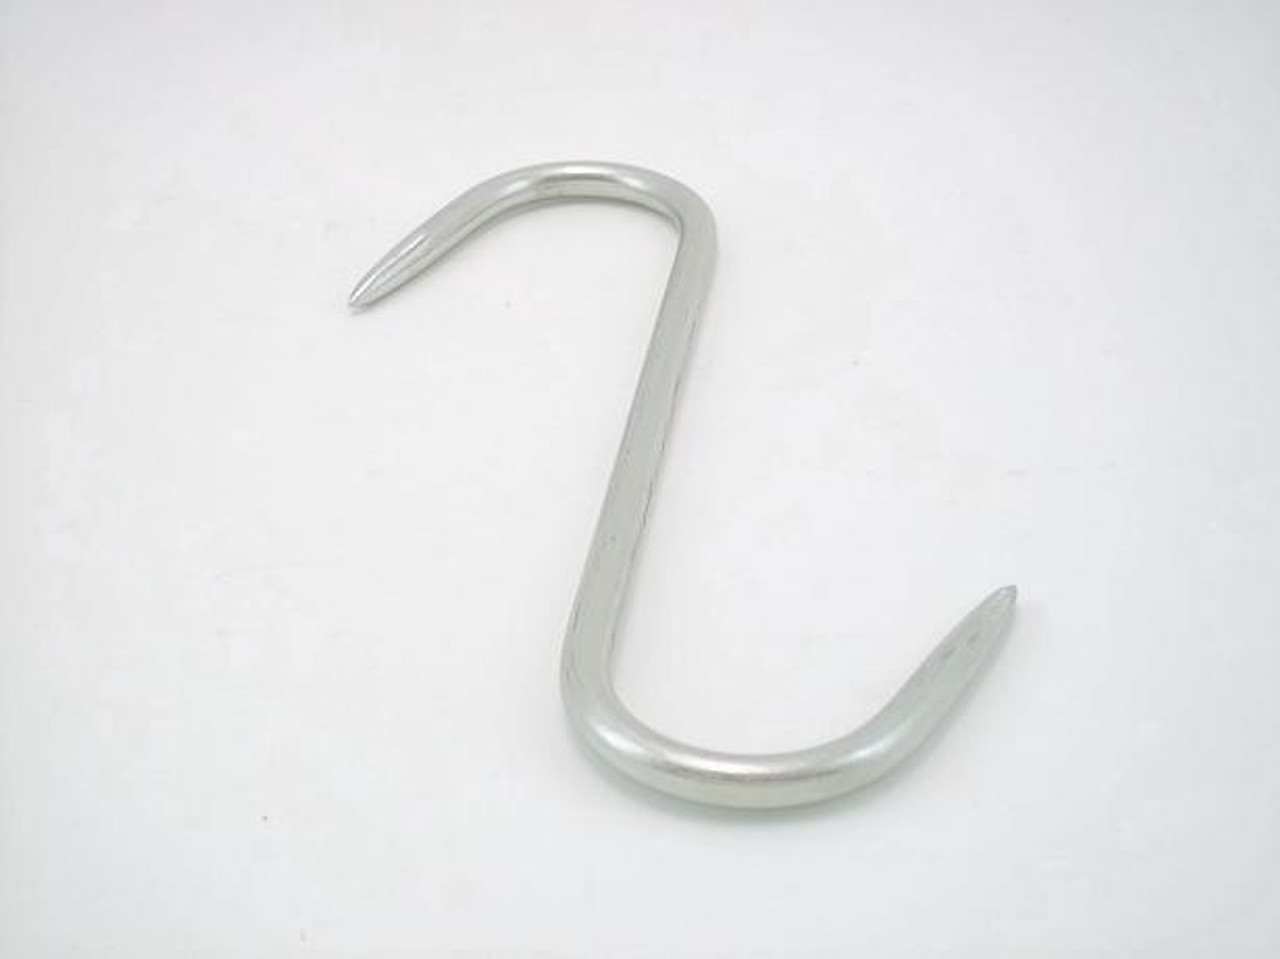 Stainless Steel S Hook (1/4" x 6") - 50lb Capacity